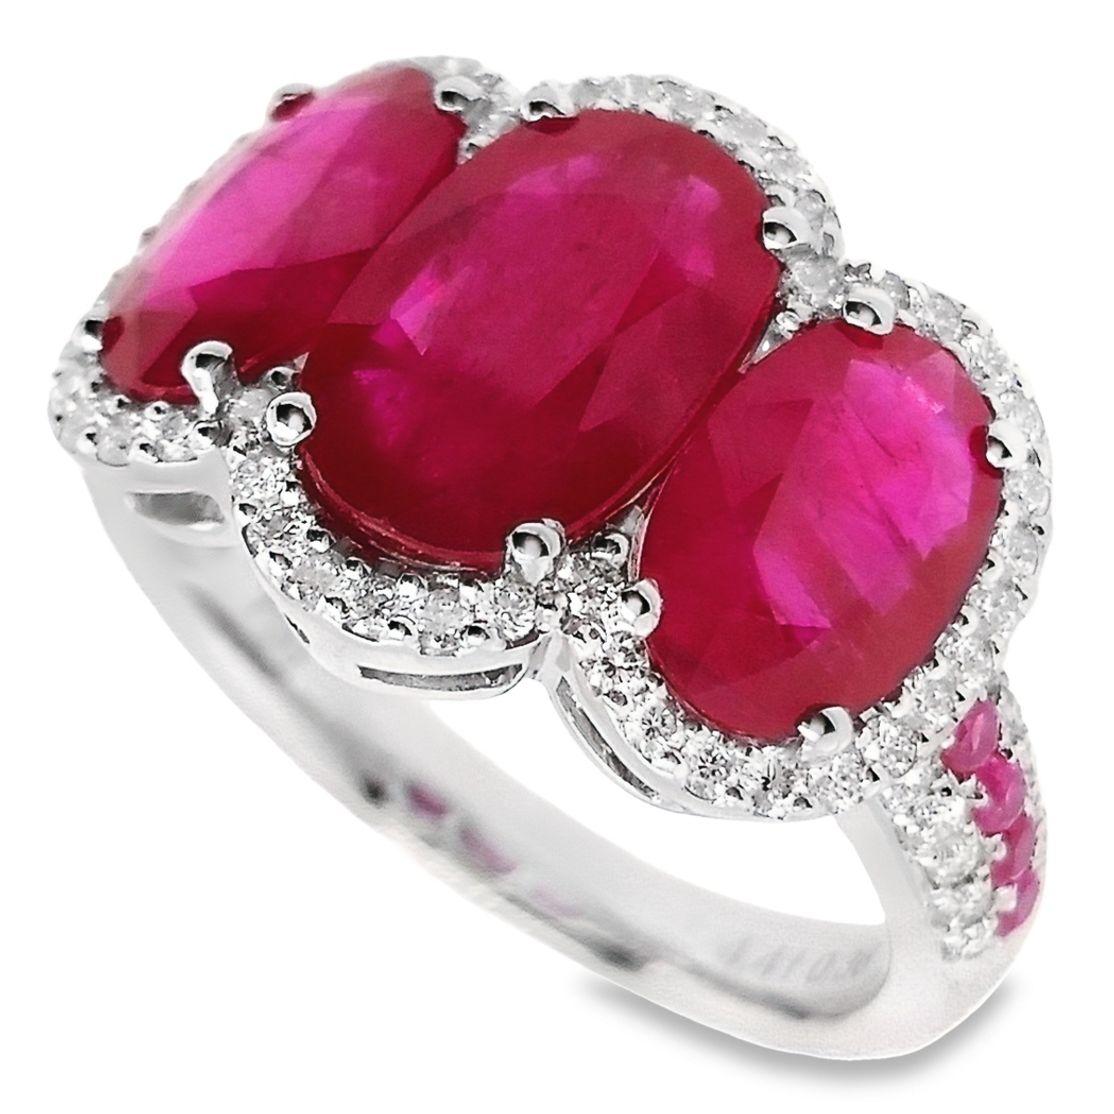 This chic ring, from the house of Top Crown Jewelry collection, is a unique piece of jewelry.
The center stones are natural rubies, oval shape with beautiful deep pink-red color, accented by 100% natural round sparkling diamonds.

This ring is